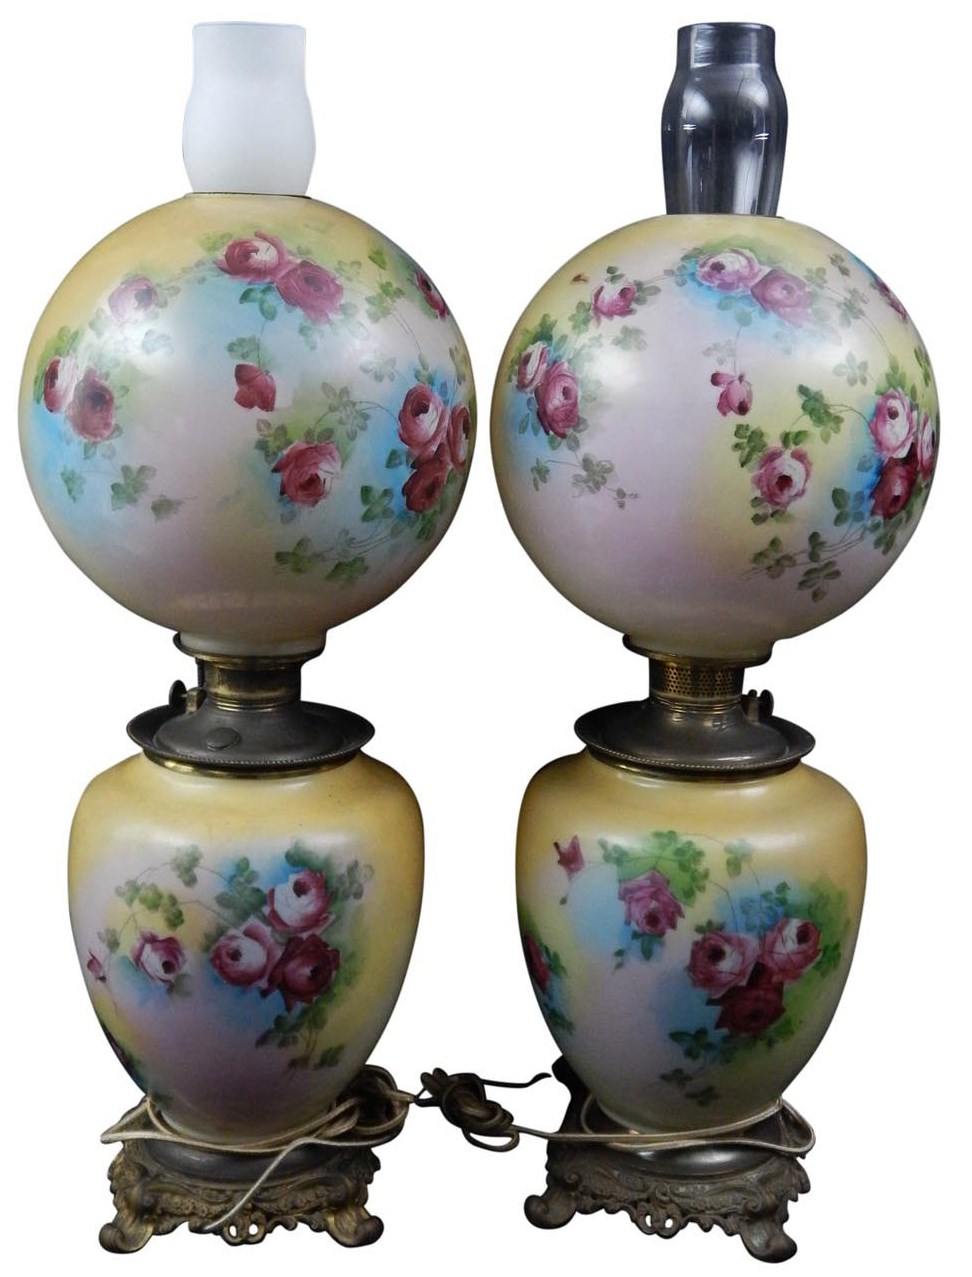 Pair of Turn of the Century Gone with the Wind Lamps